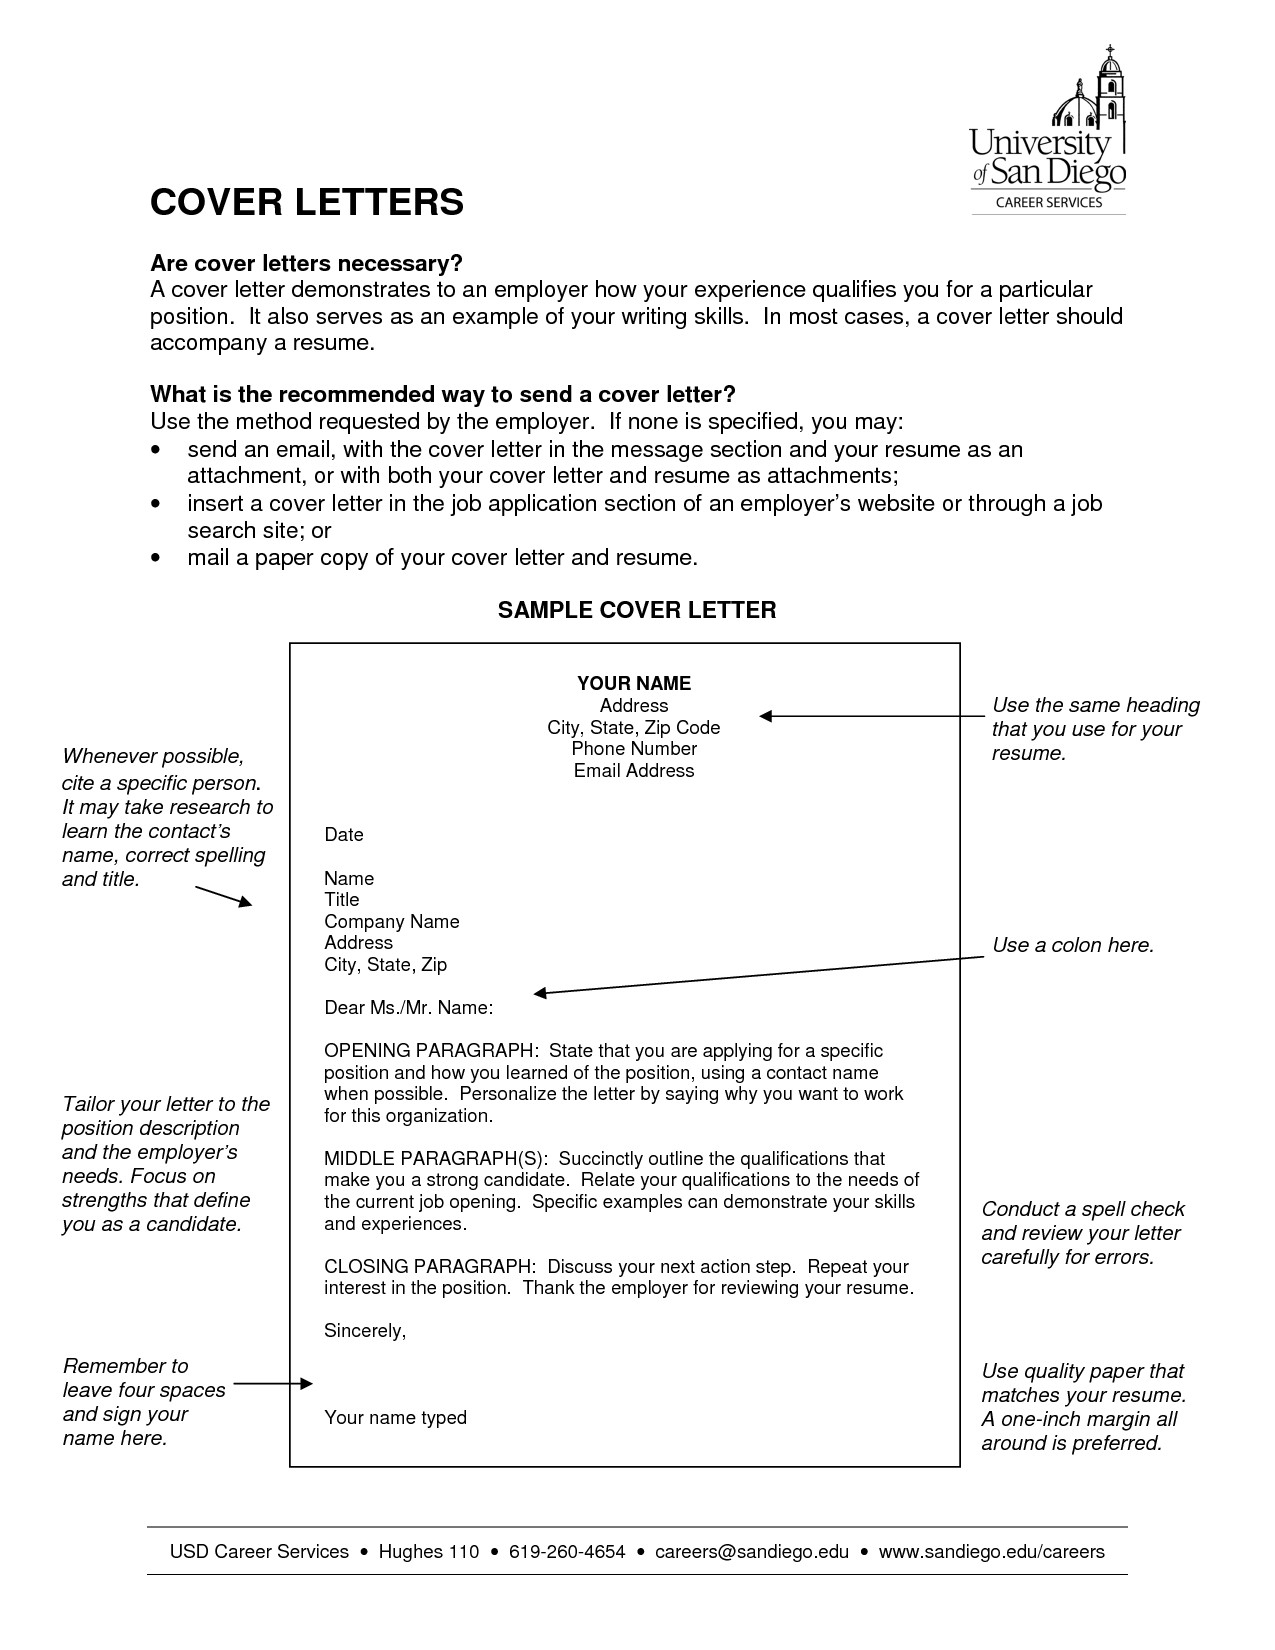 are cover letters necessary for internships reddit